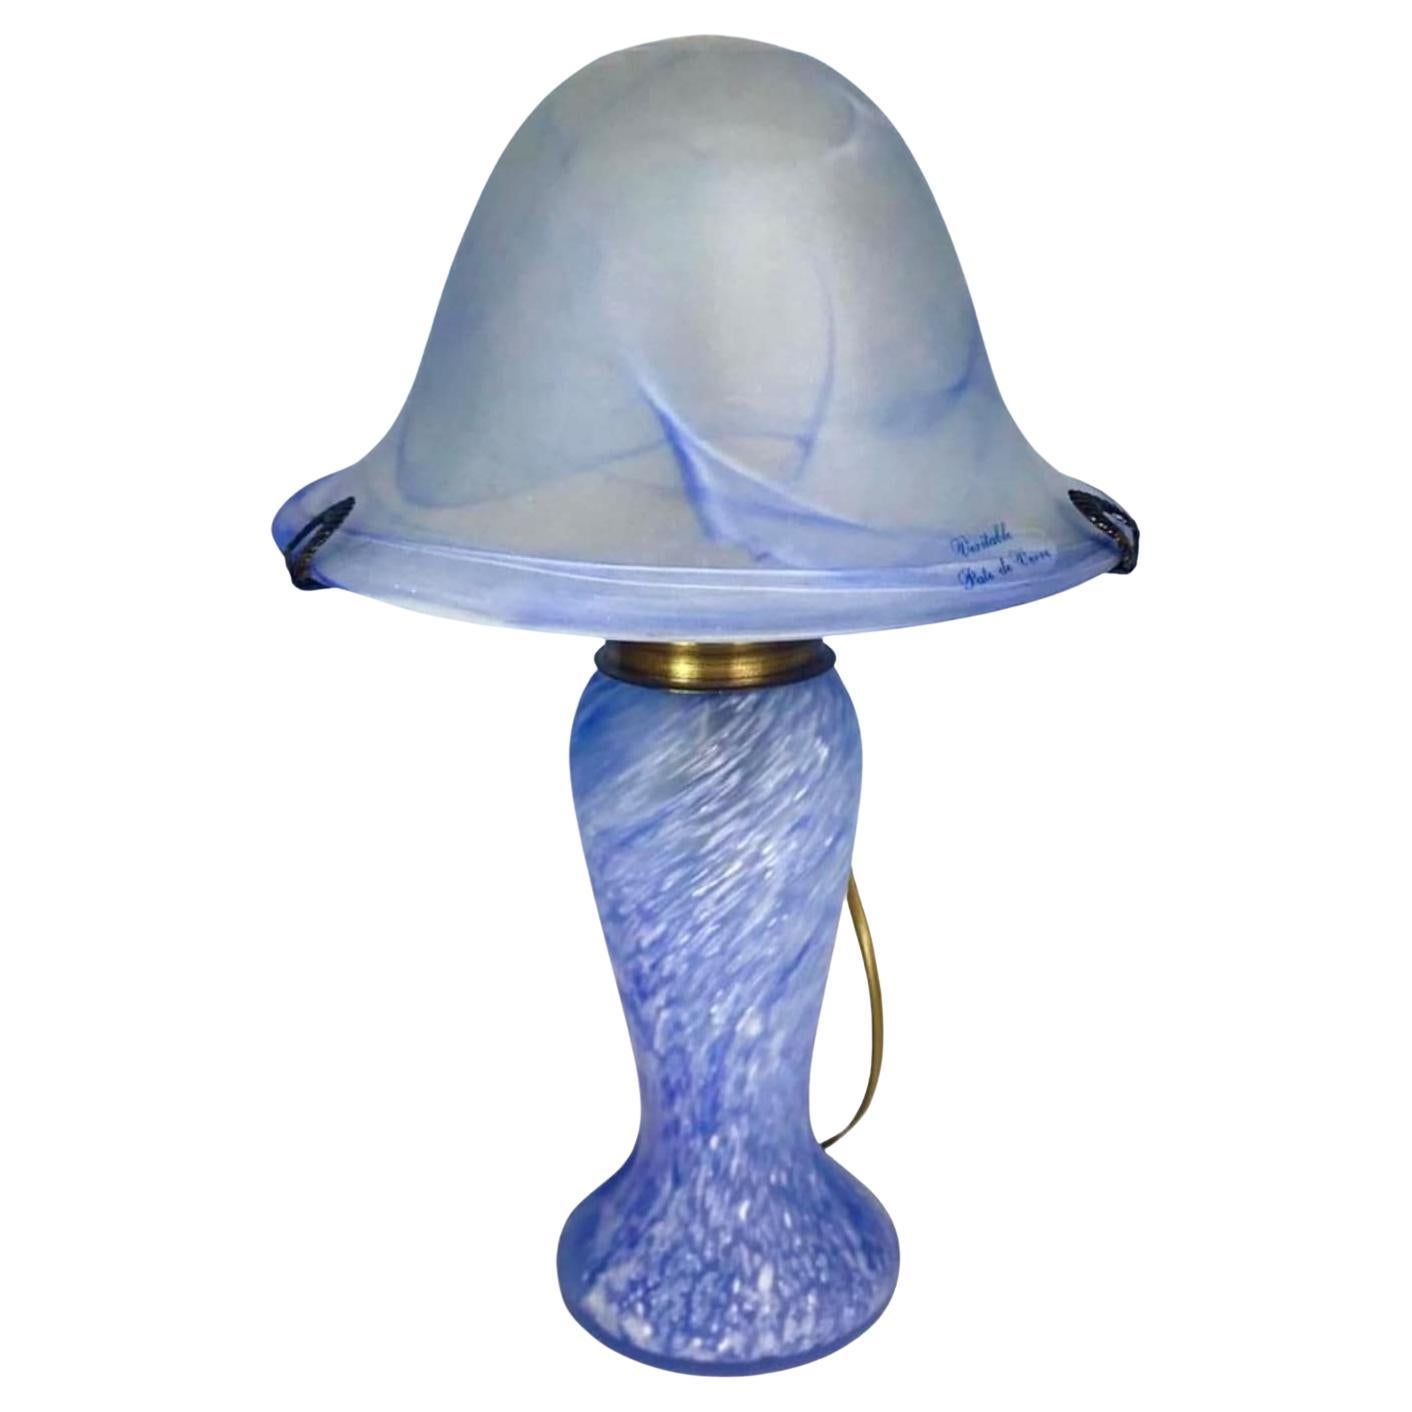 Vintage Blue Table Lamp in Art Glass.